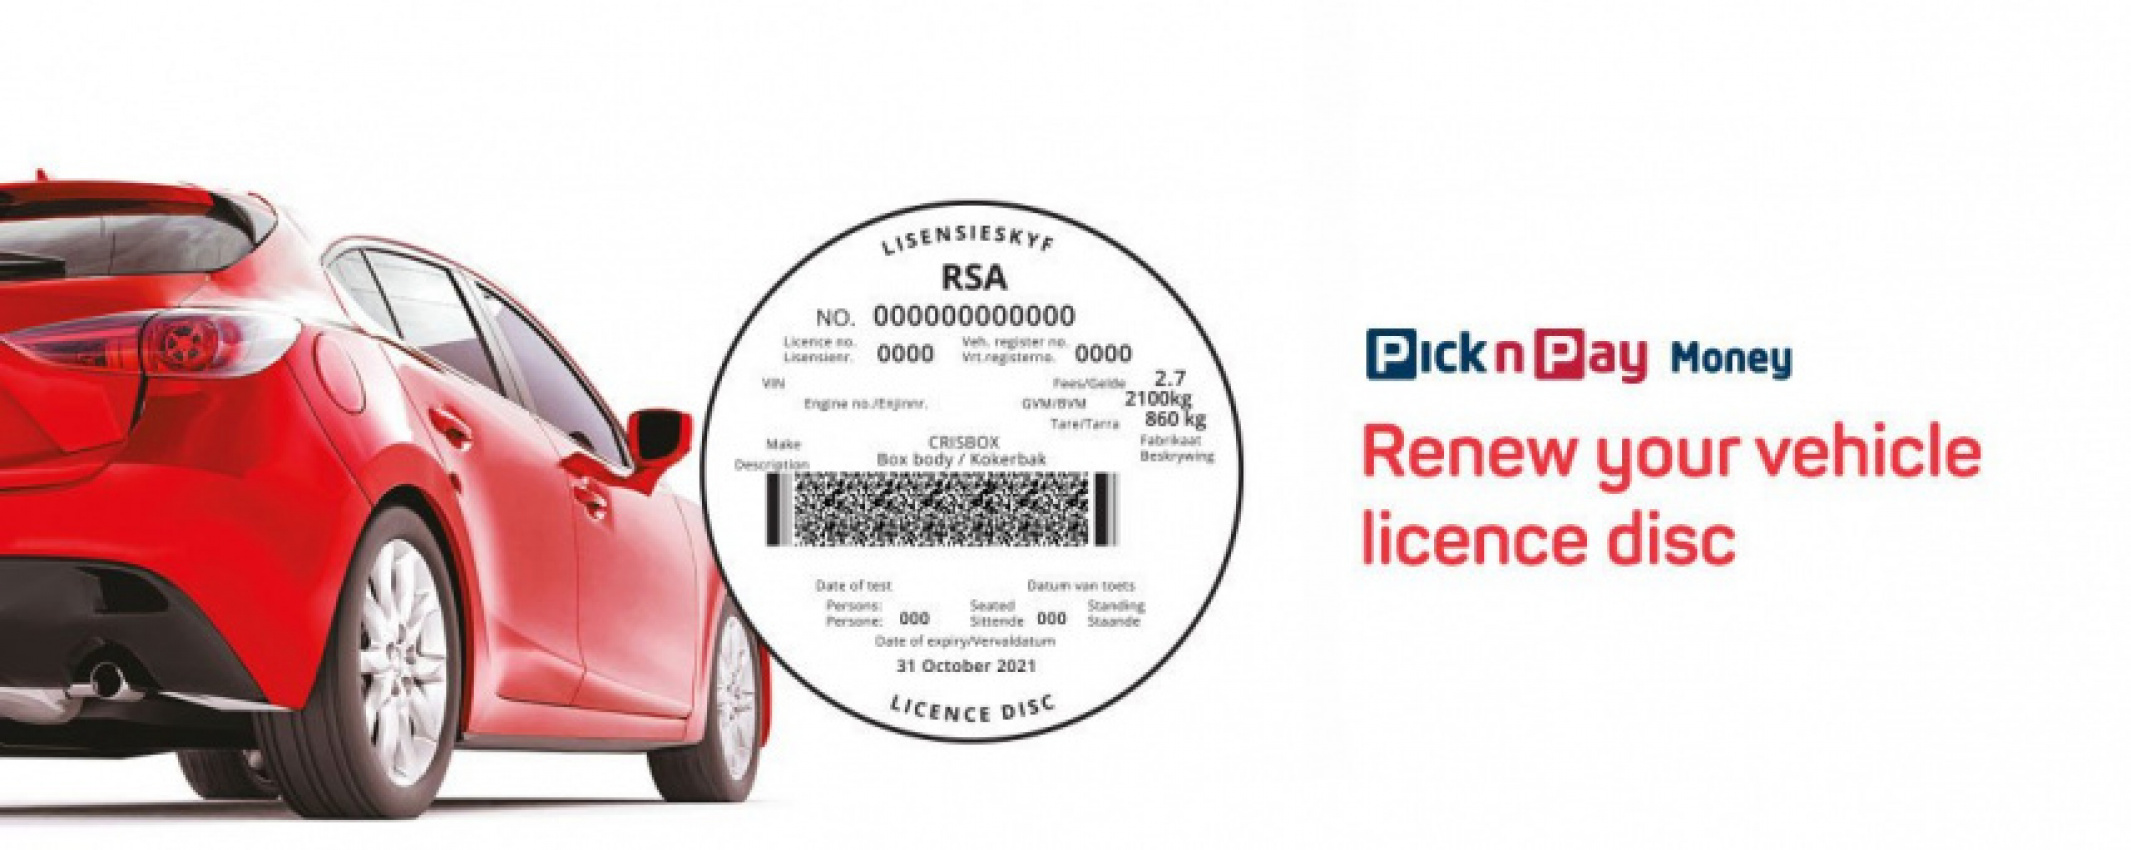 autos, cars, news, pick n pay, vehicle licence, pick n pay launches car licence disc renewals nationwide – new price